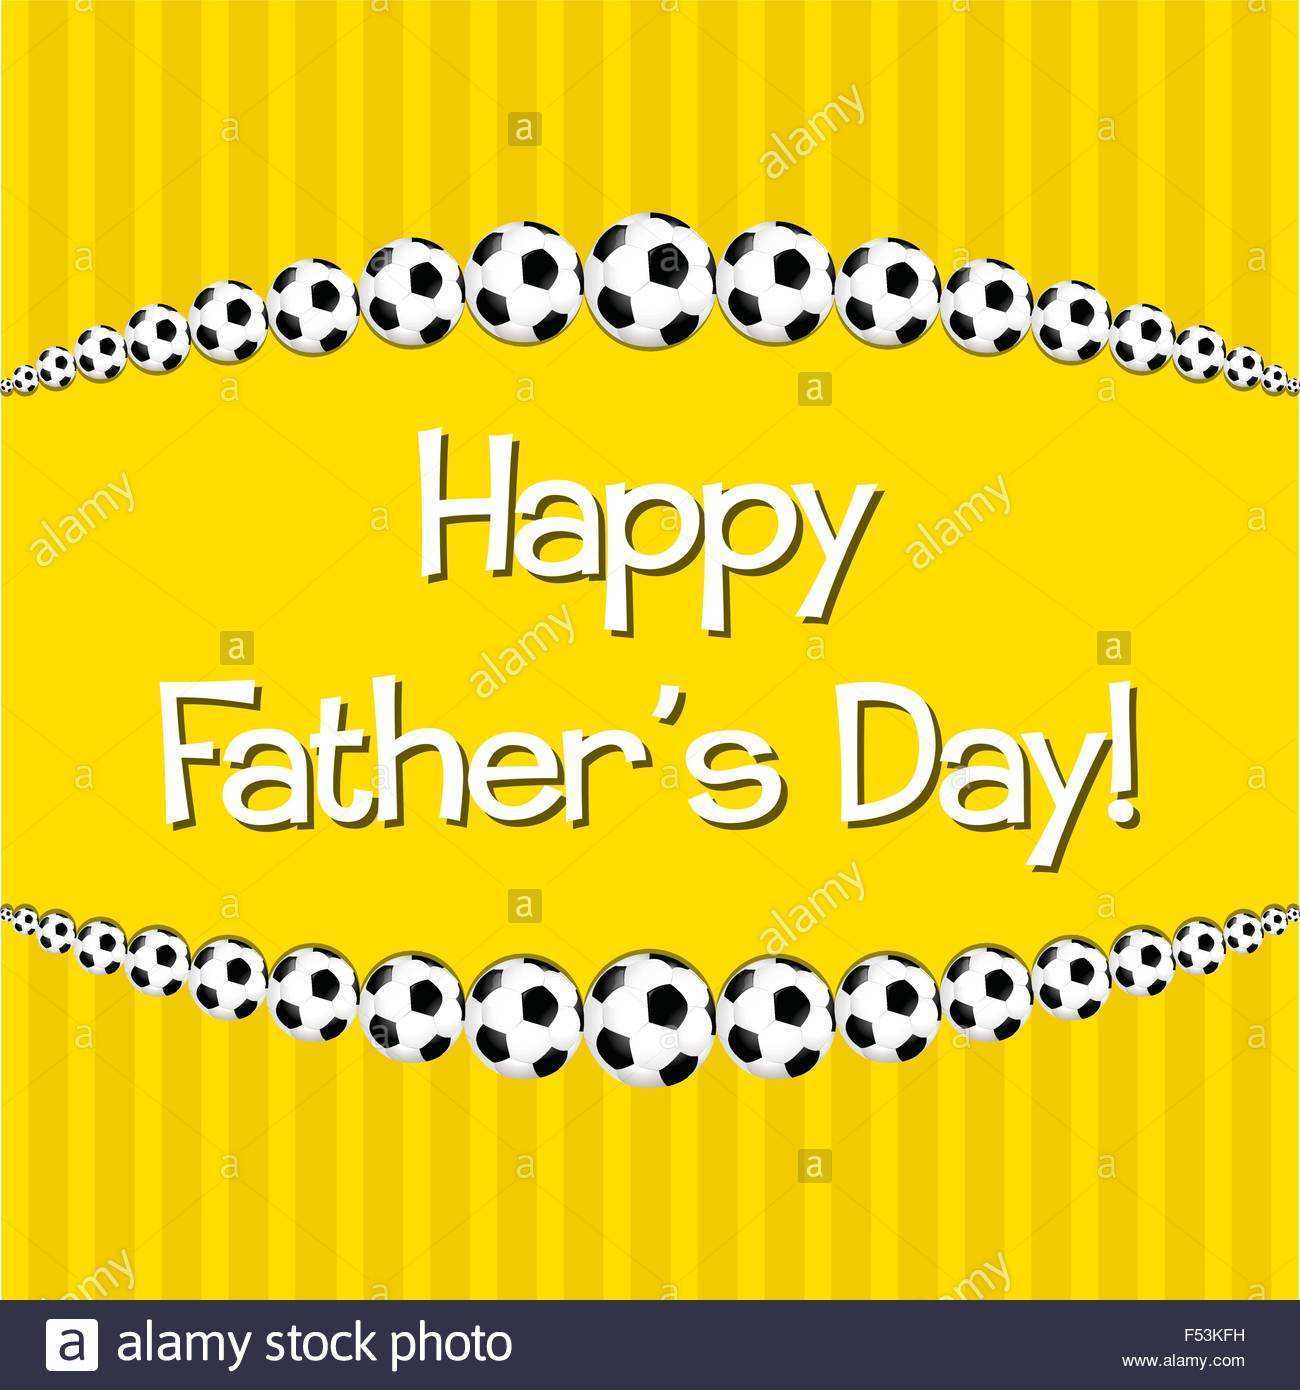 48 Blank Football Father S Day Card Template Templates by Football Father S Day Card Template